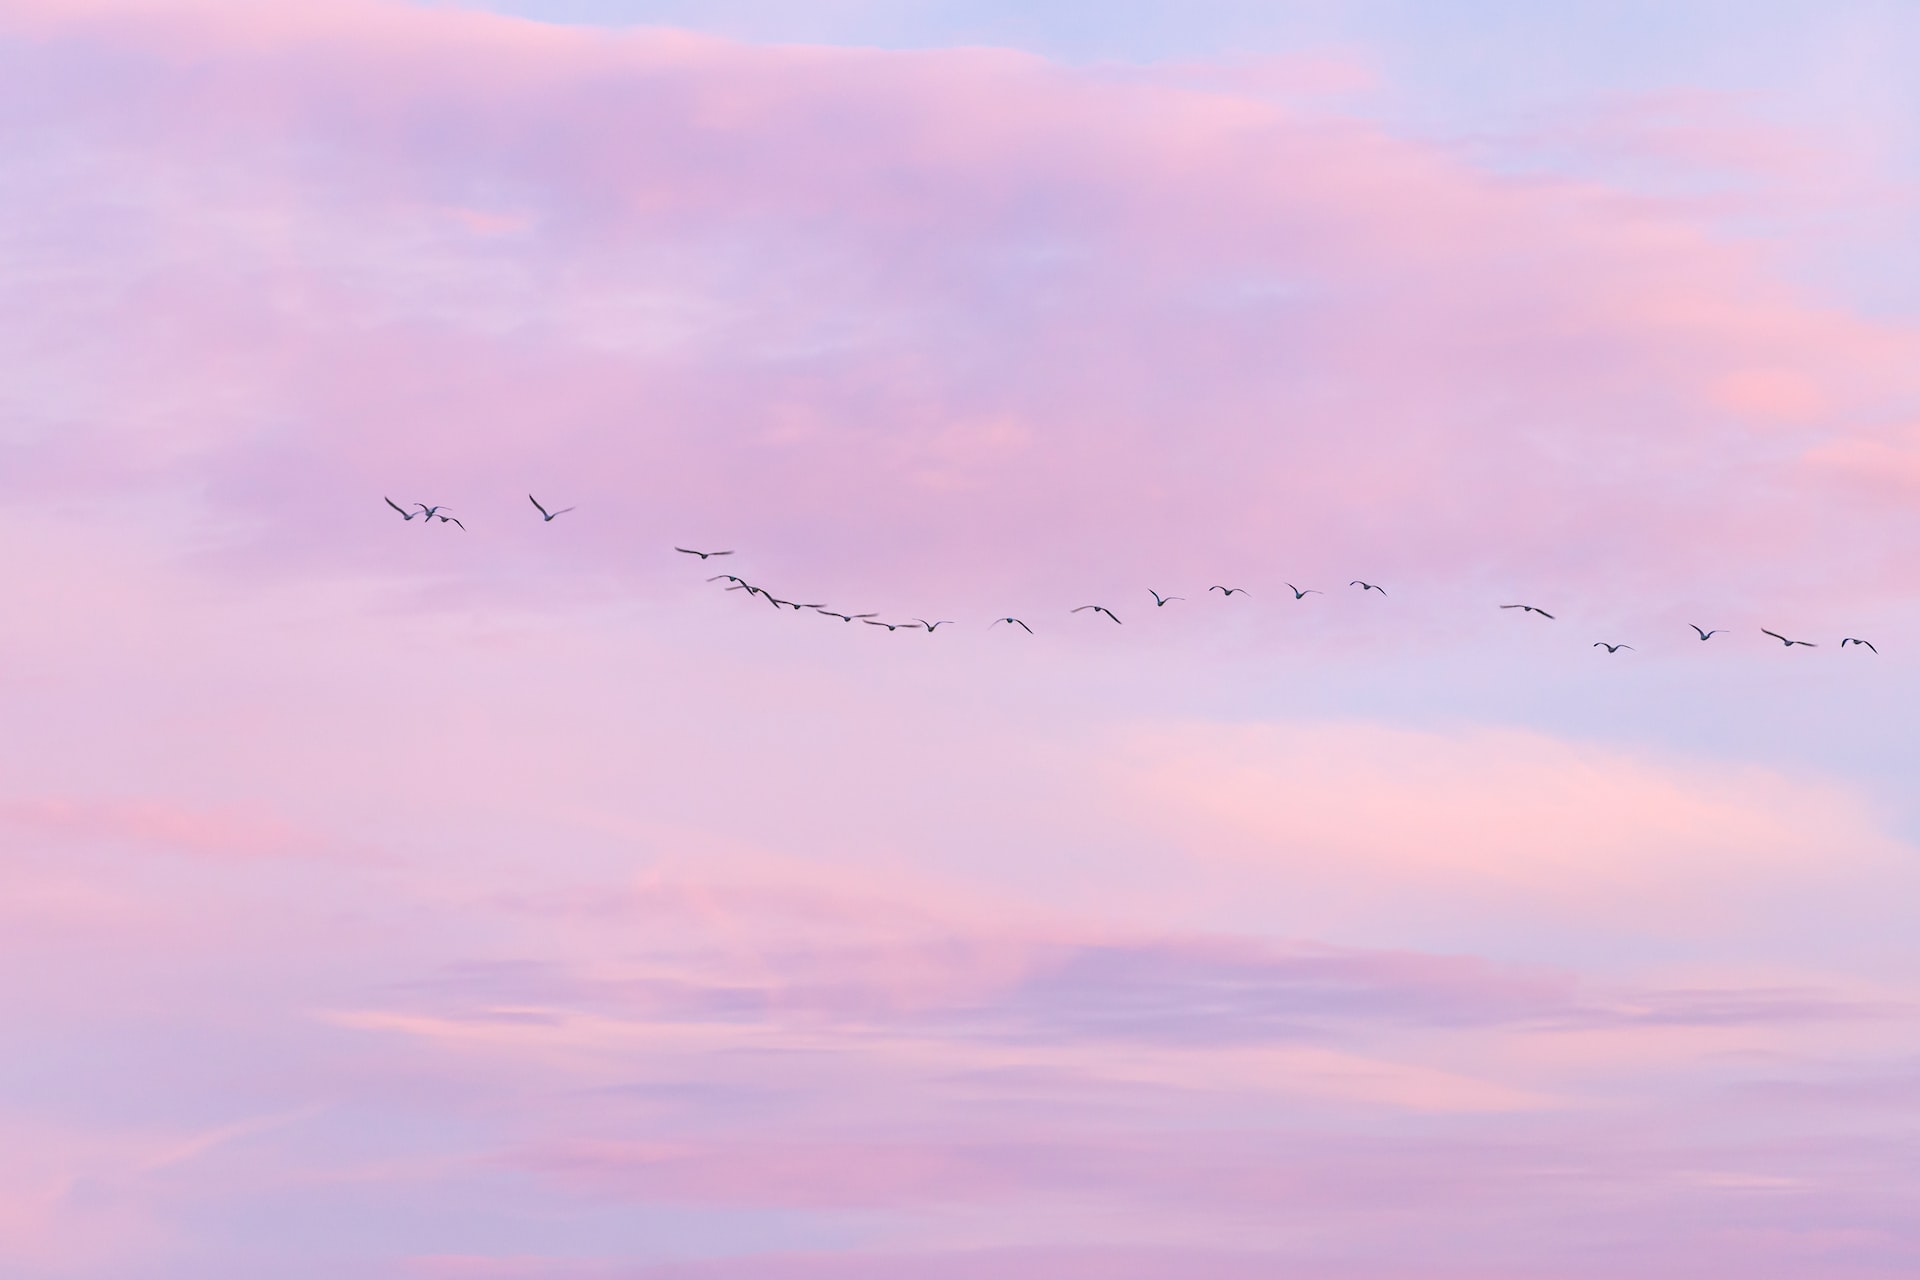 Purple skies with pink clouds. A large flock of birds flying free.